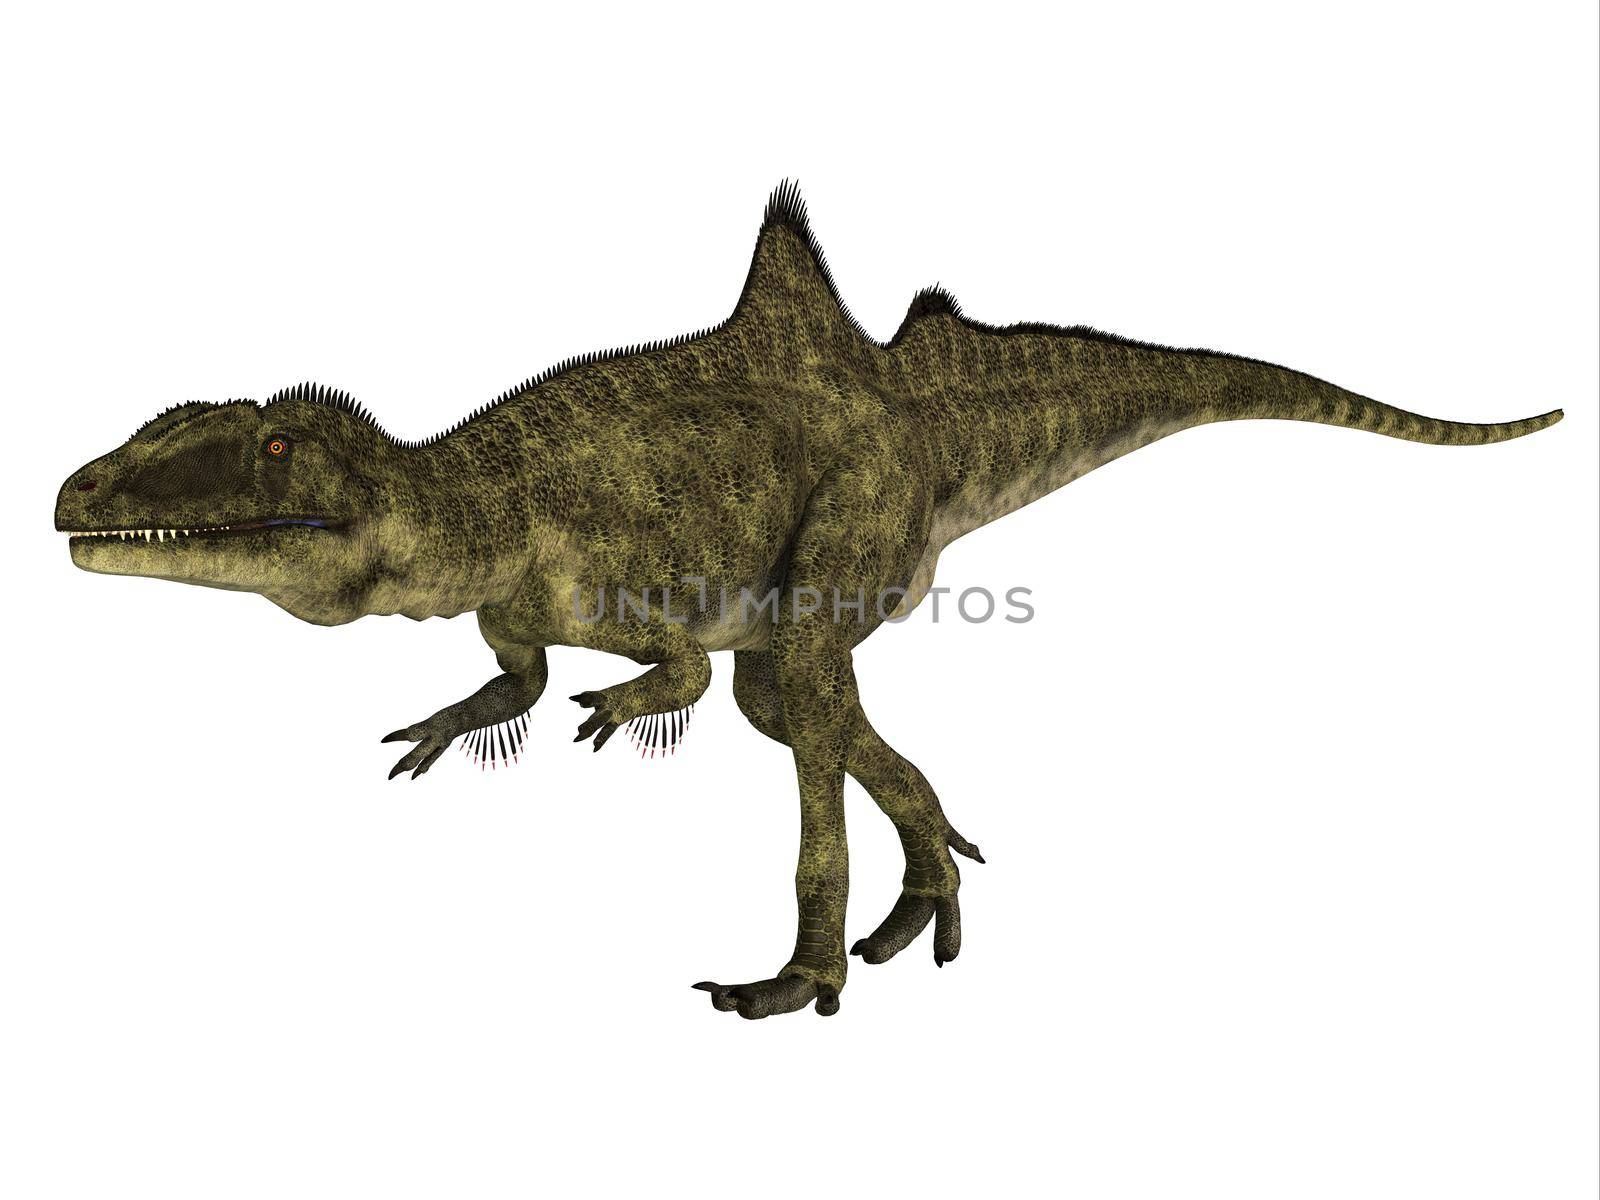 Concavenator was a carnivorous theropod dinosaur that lived in Spain during the Cretaceous Period.